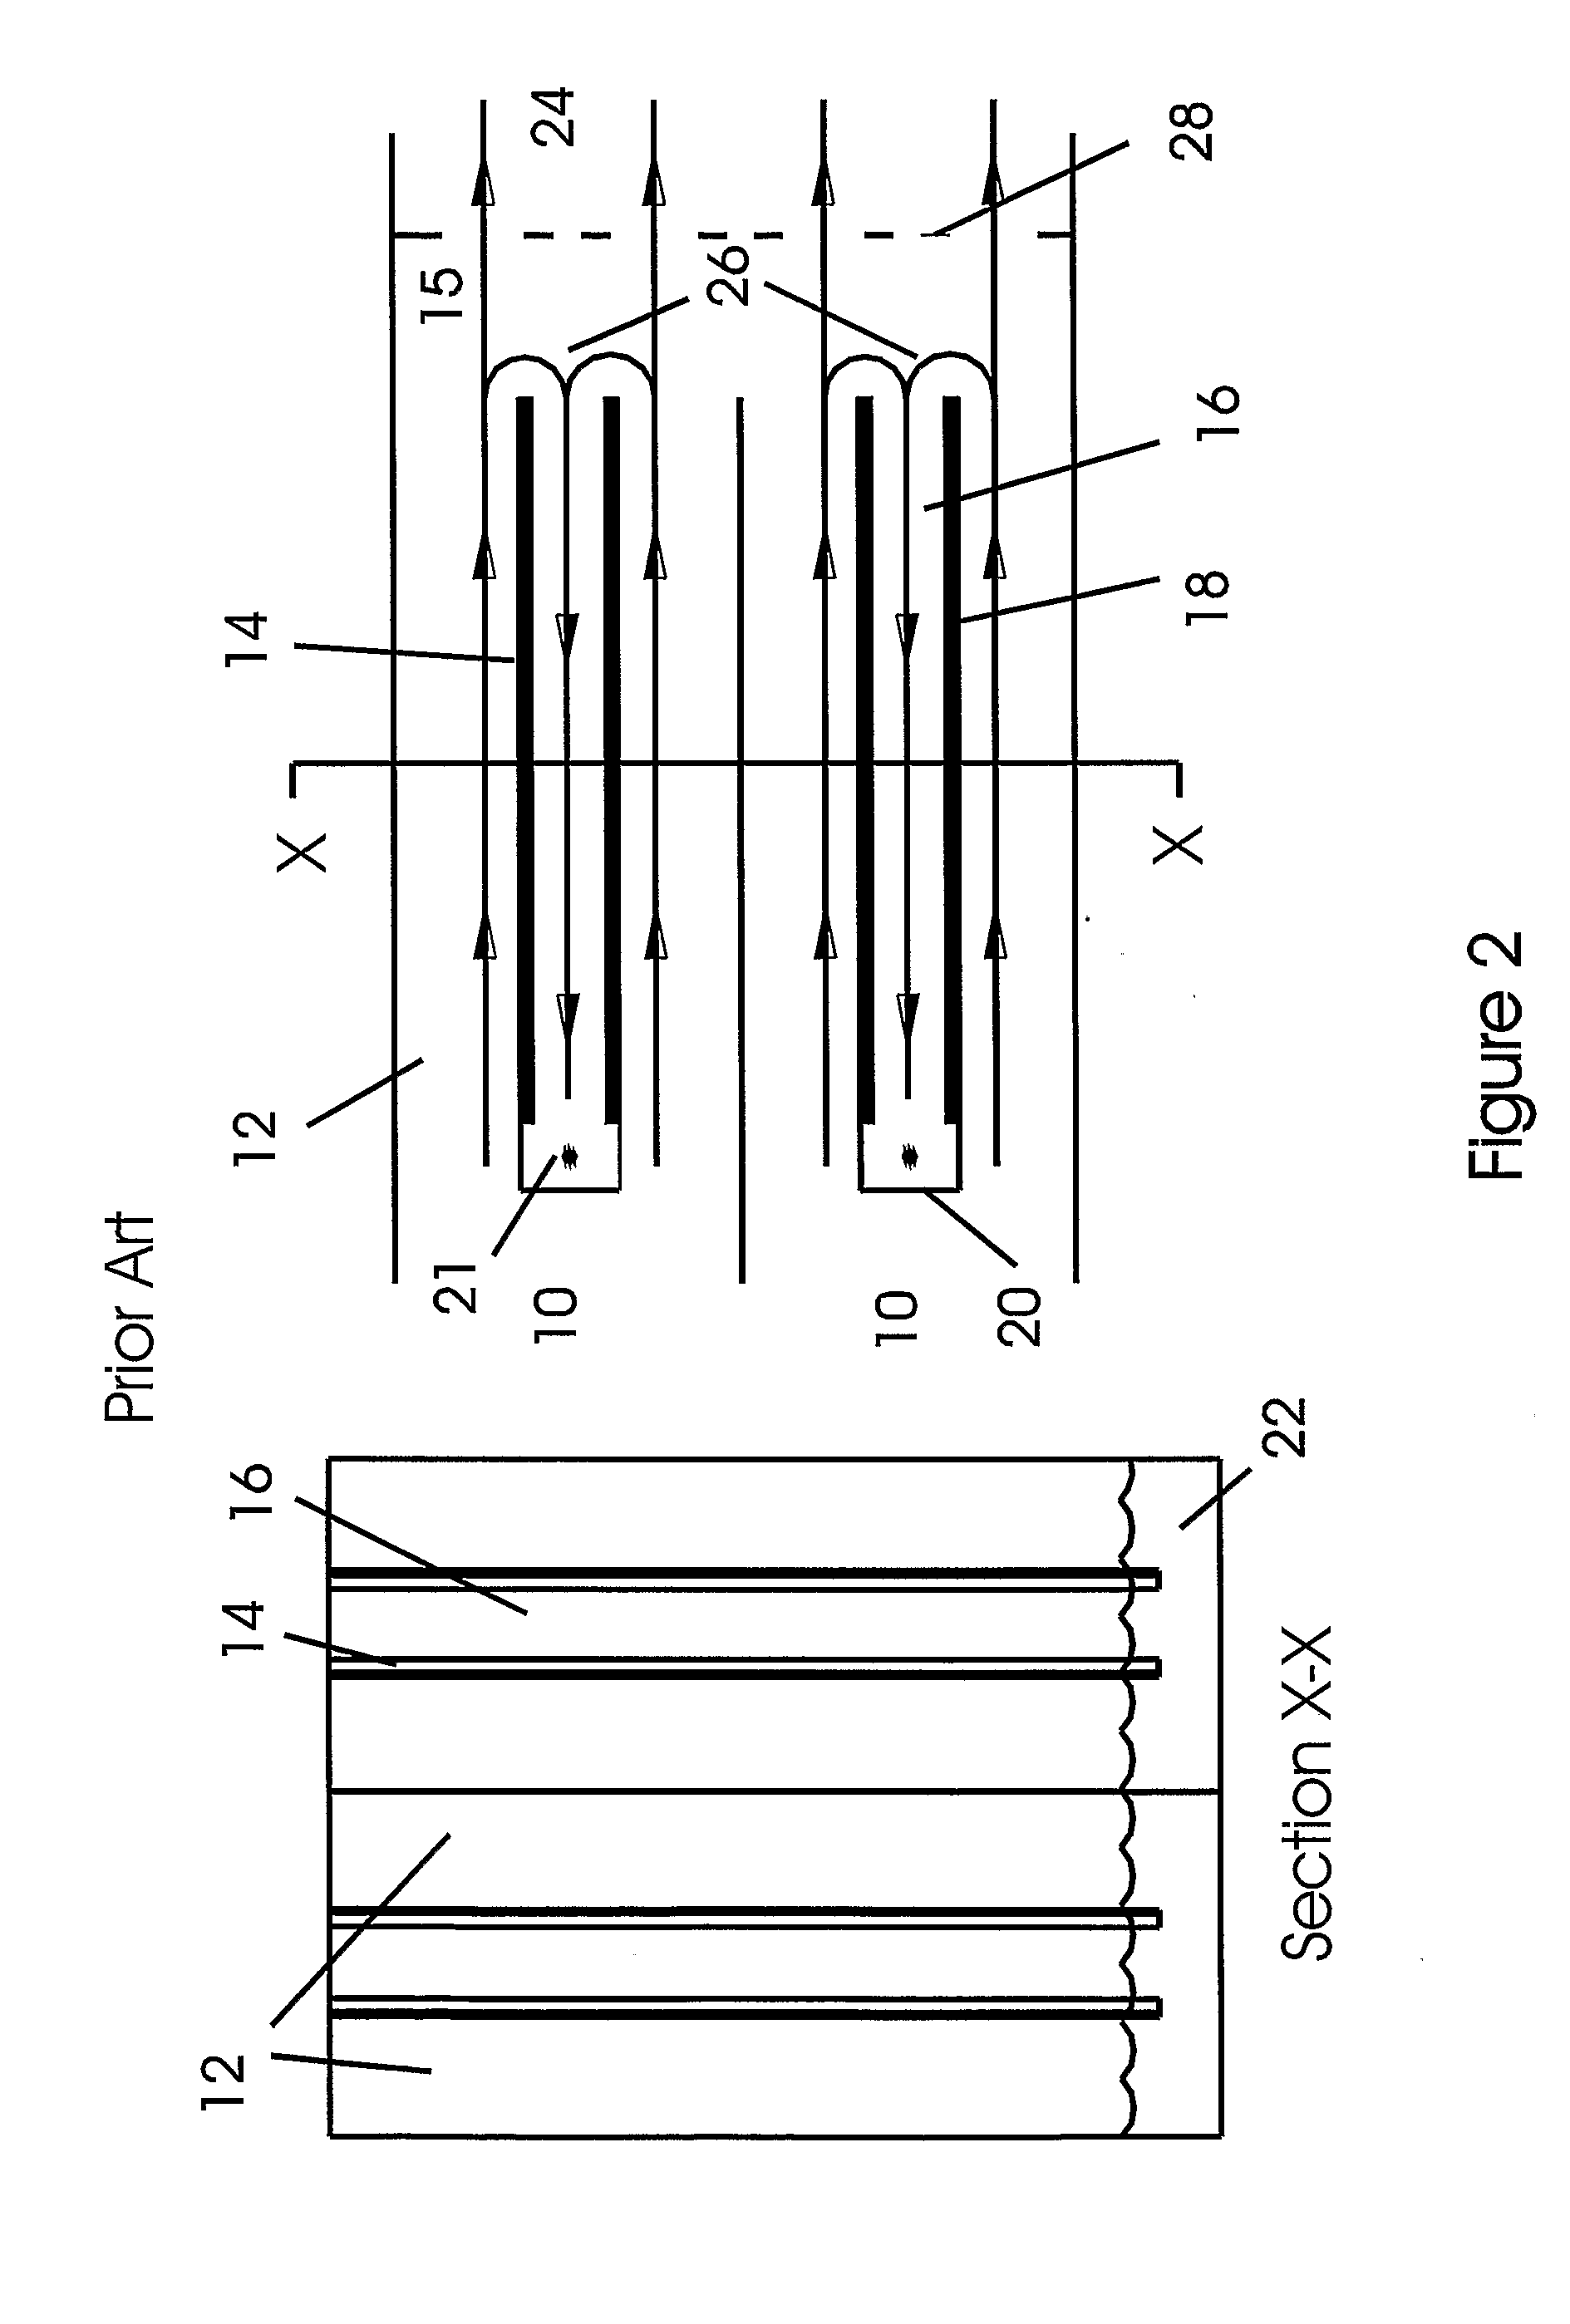 Method and Materials for Improving Evaporative Heat Exchangers